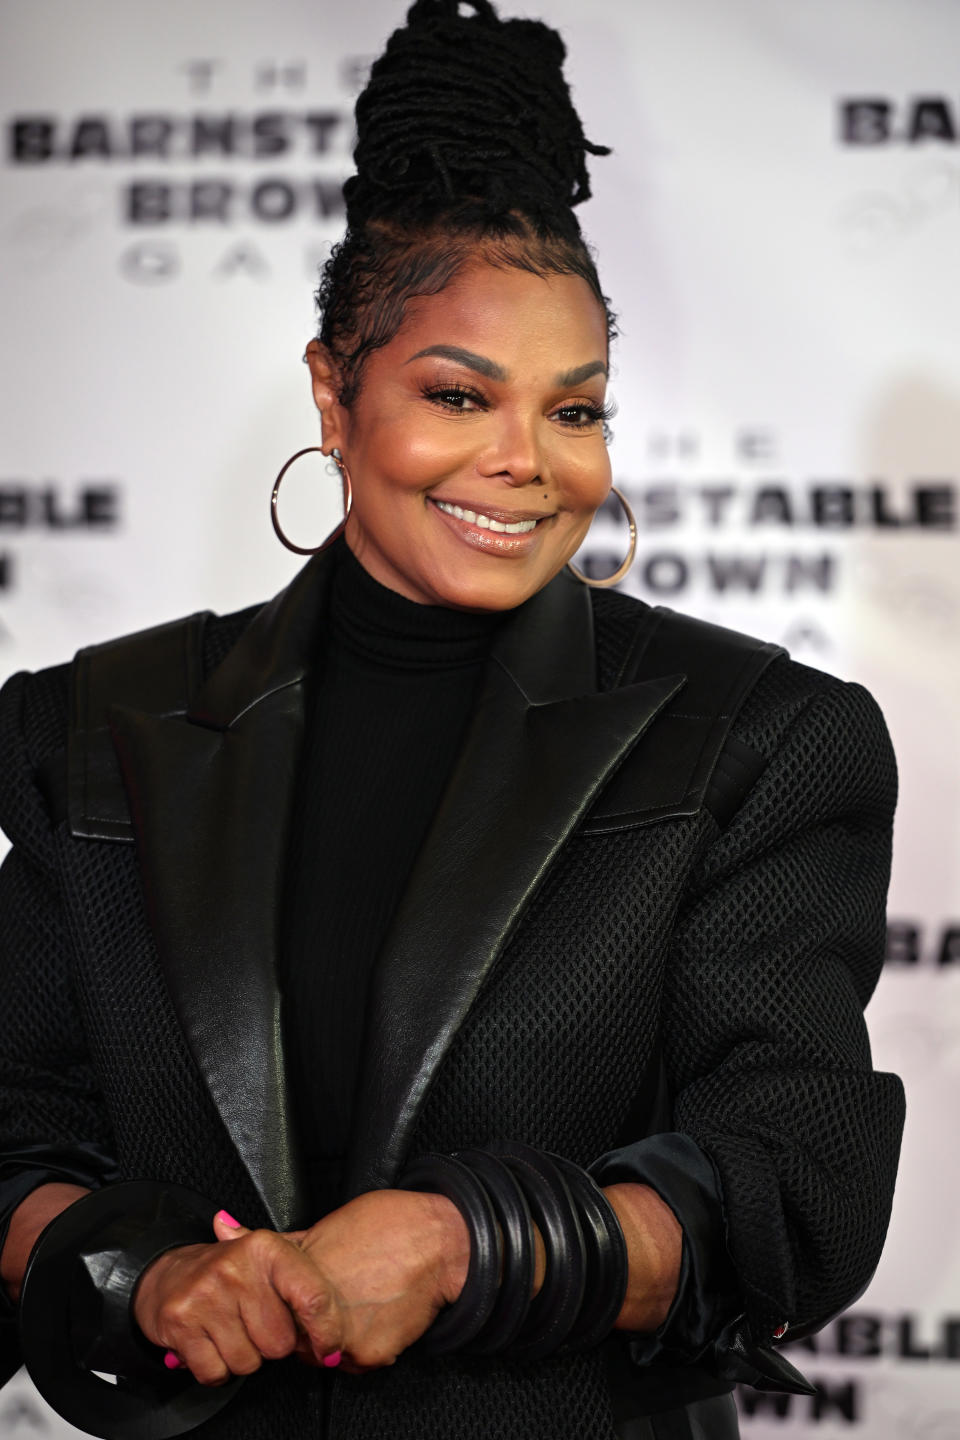 Janet Jackson arrives at the Barnstable Brown in May 2022